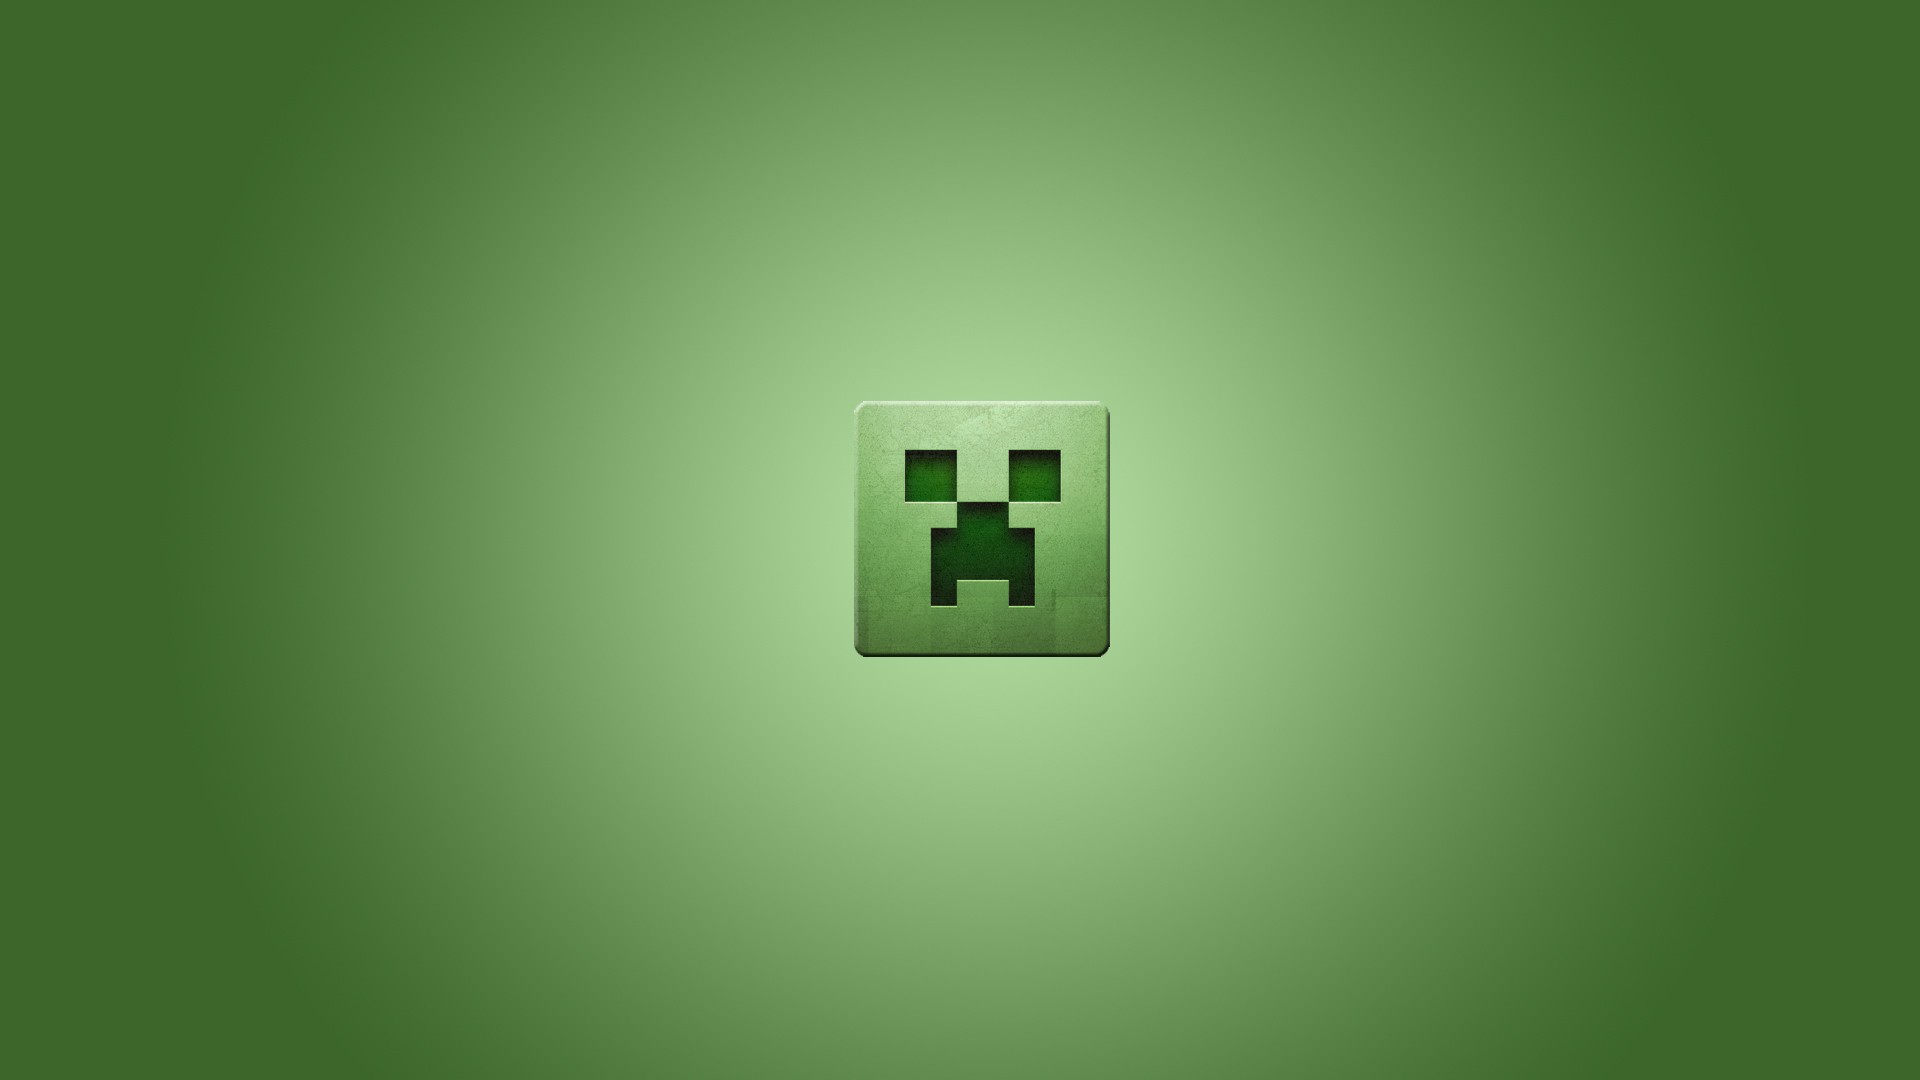 video, Games, Minimalistic, Creeper, Minecraft, Simplistic, Simple, Background, Green, Background Wallpaper